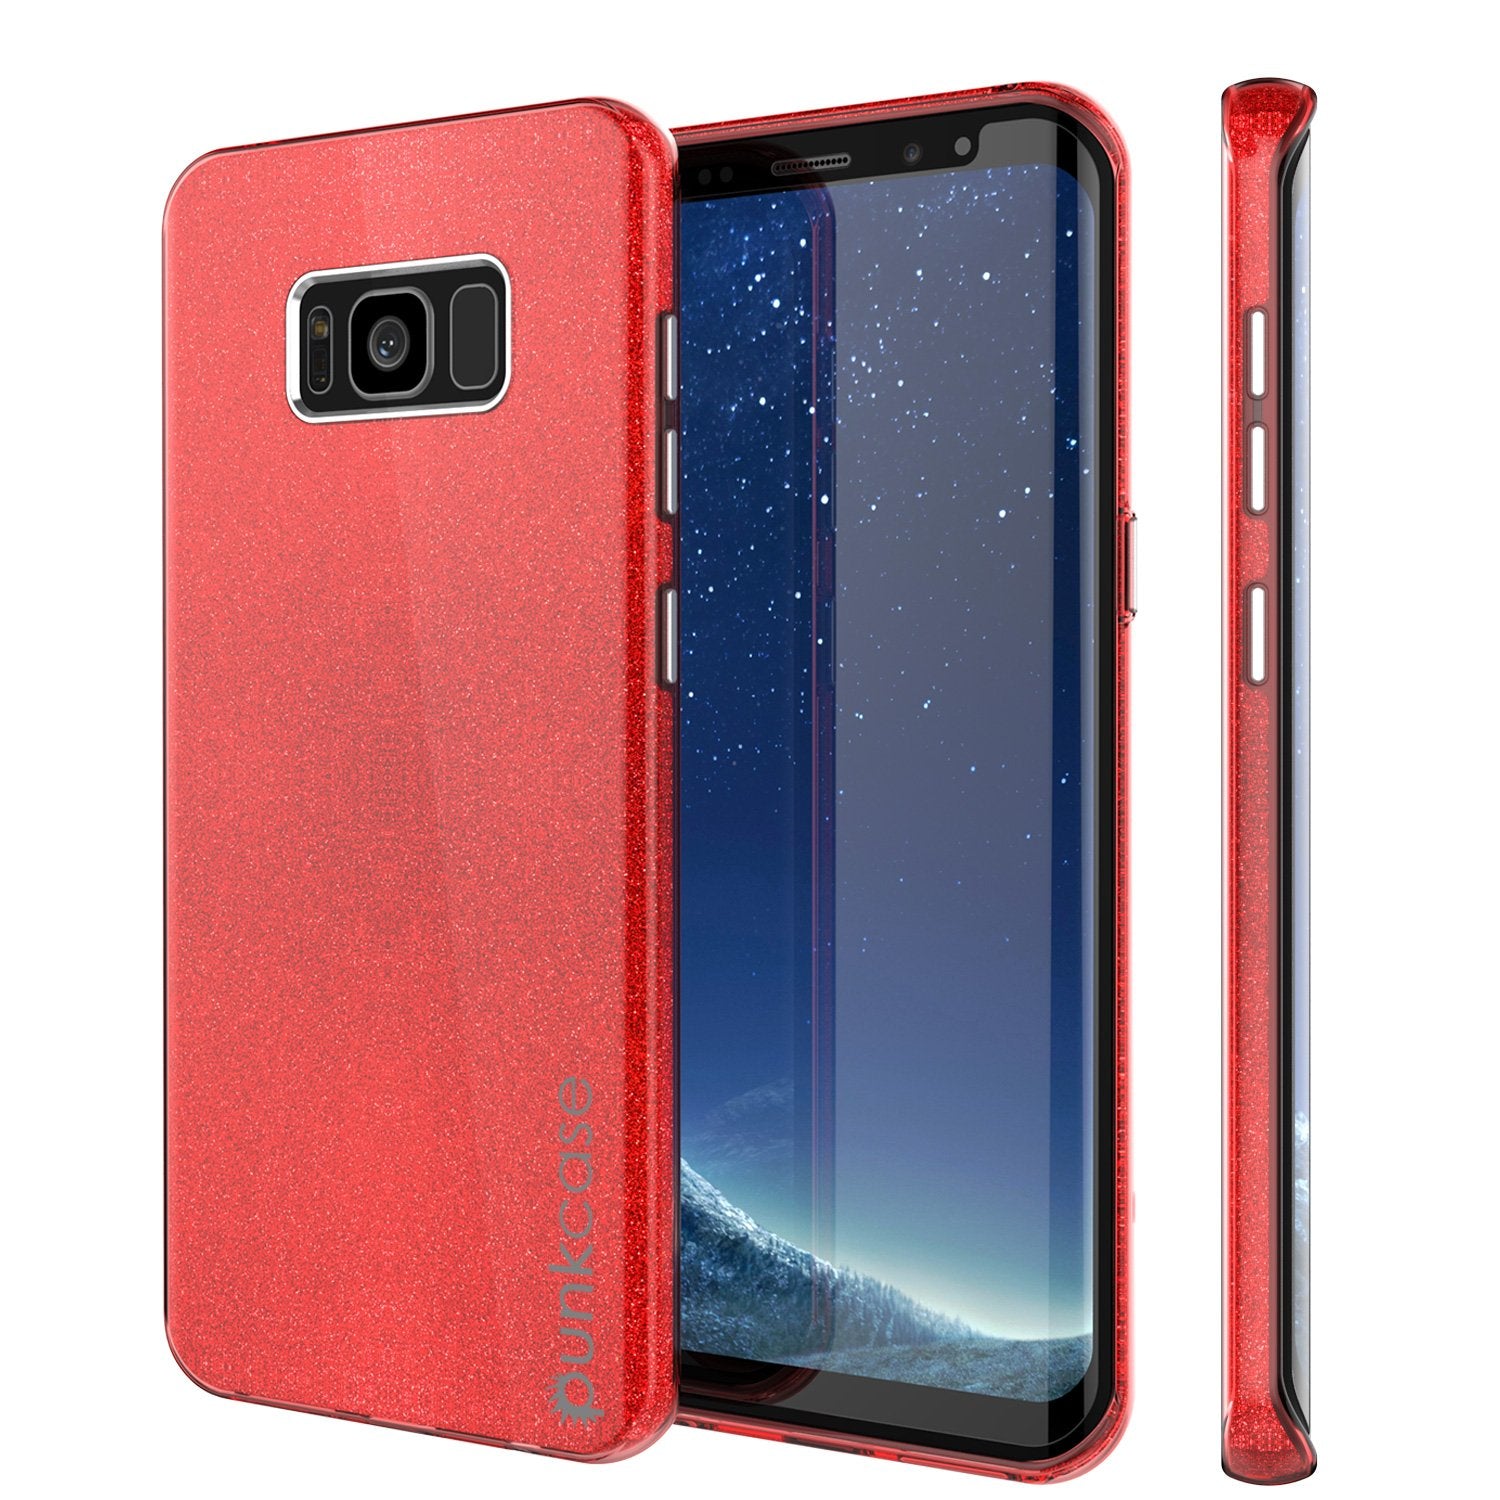 Galaxy S8 Case, Punkcase Galactic 2.0 Series Armor Red Cover